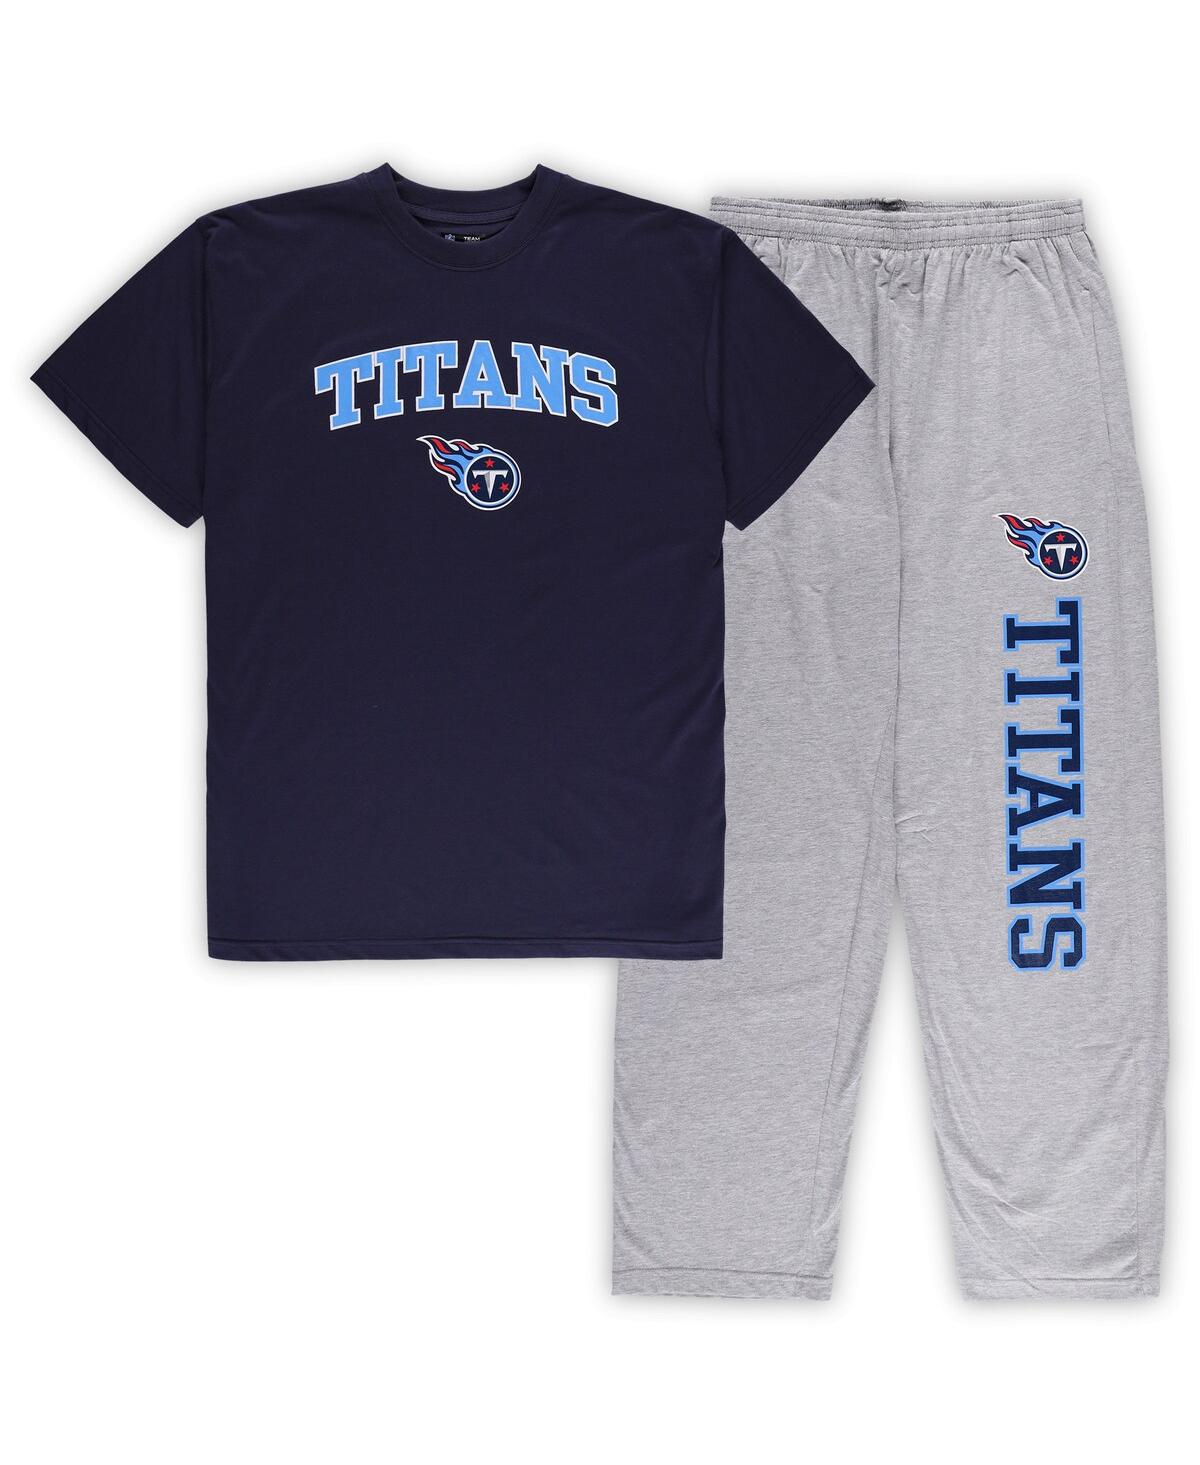 Men's Concepts Sport Navy, Heather Gray Tennessee Titans Big and Tall T-shirt and Pajama Pants Sleep Set - Navy, Heather Gray